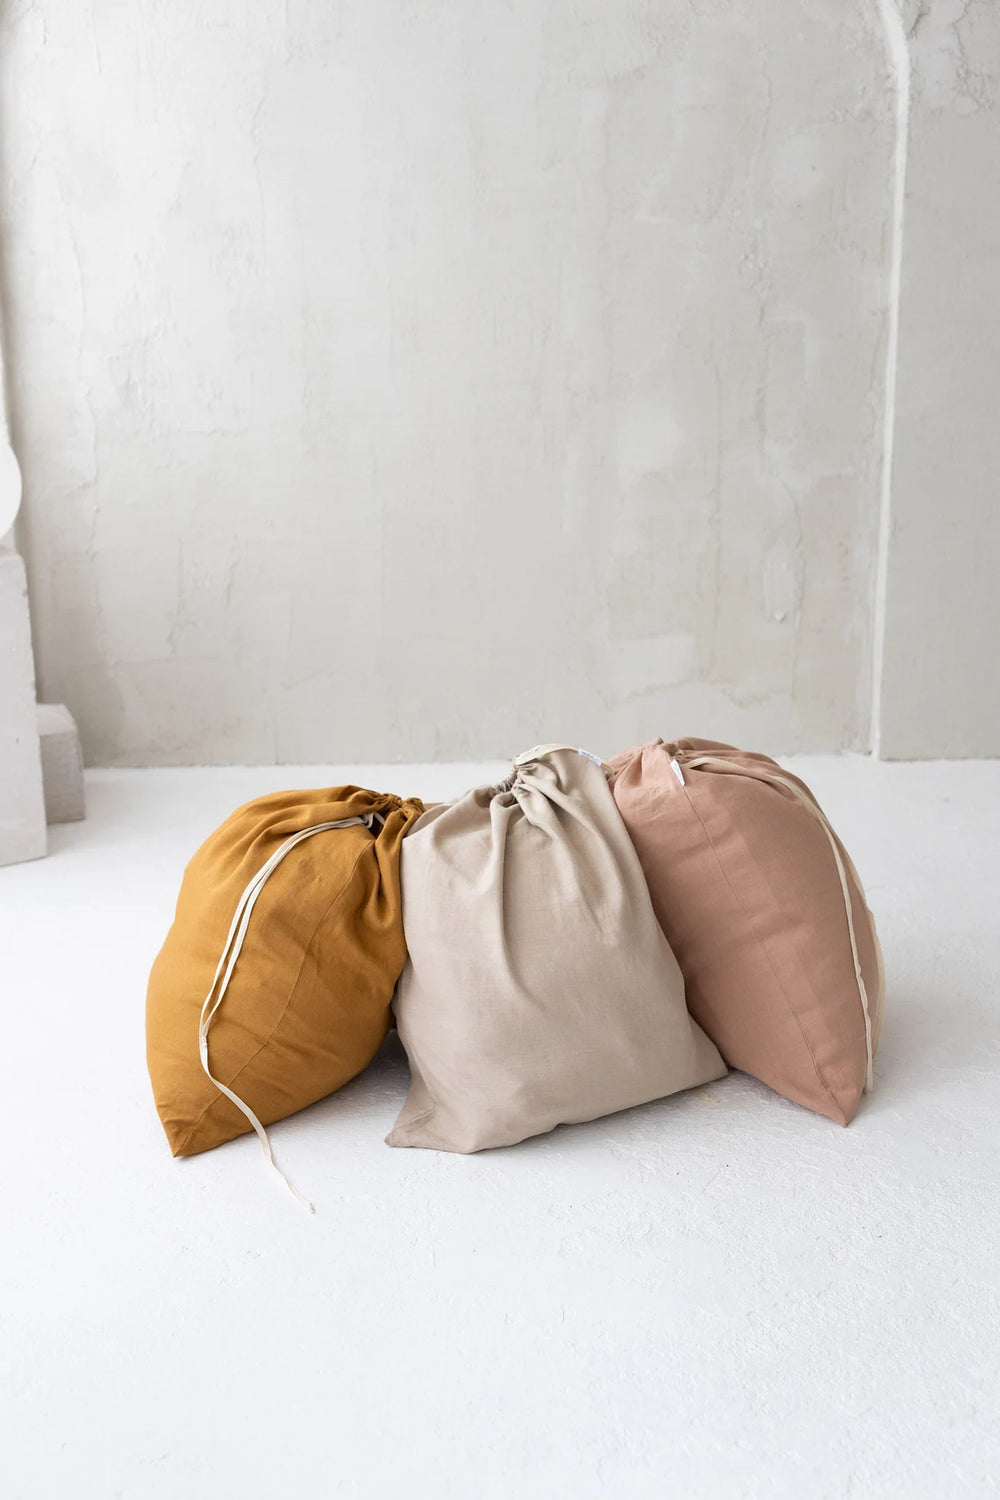 Linen Laundry Bag In Various Colors 1 | Daily Linen